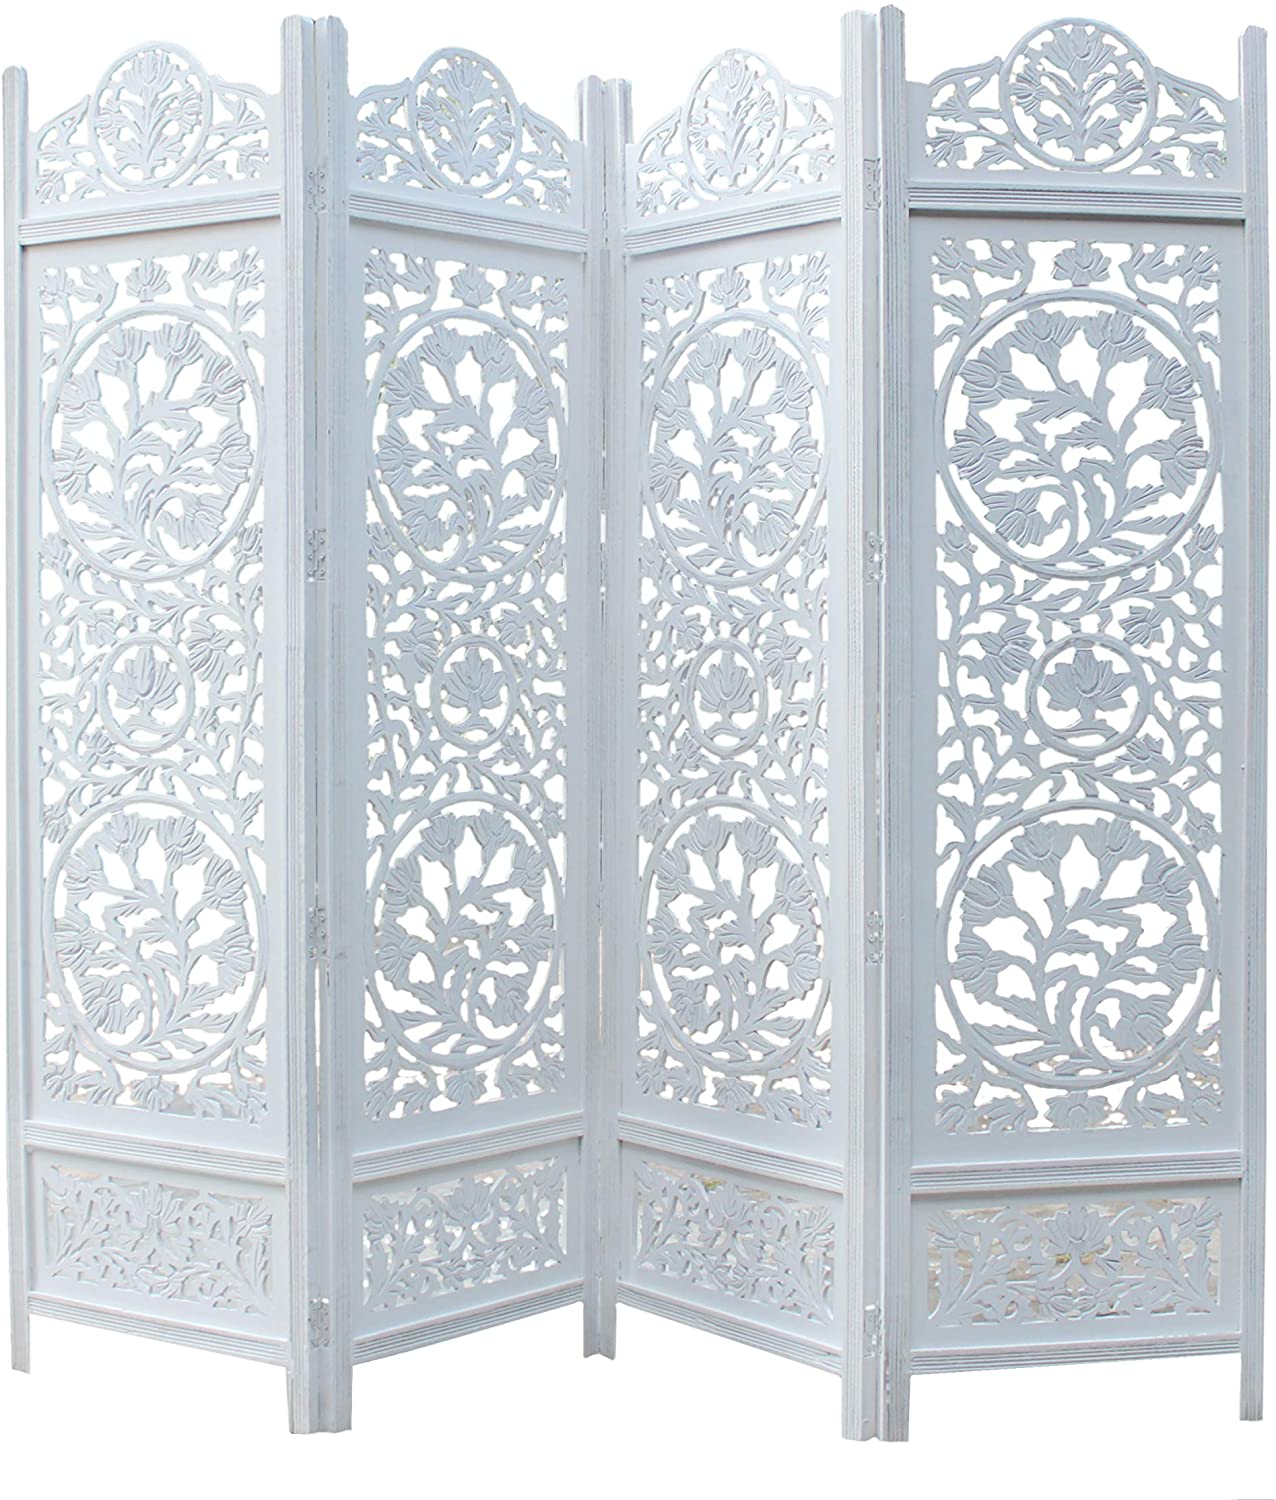 4 Panel Wooden Partition for Living Room & Office in White Colour